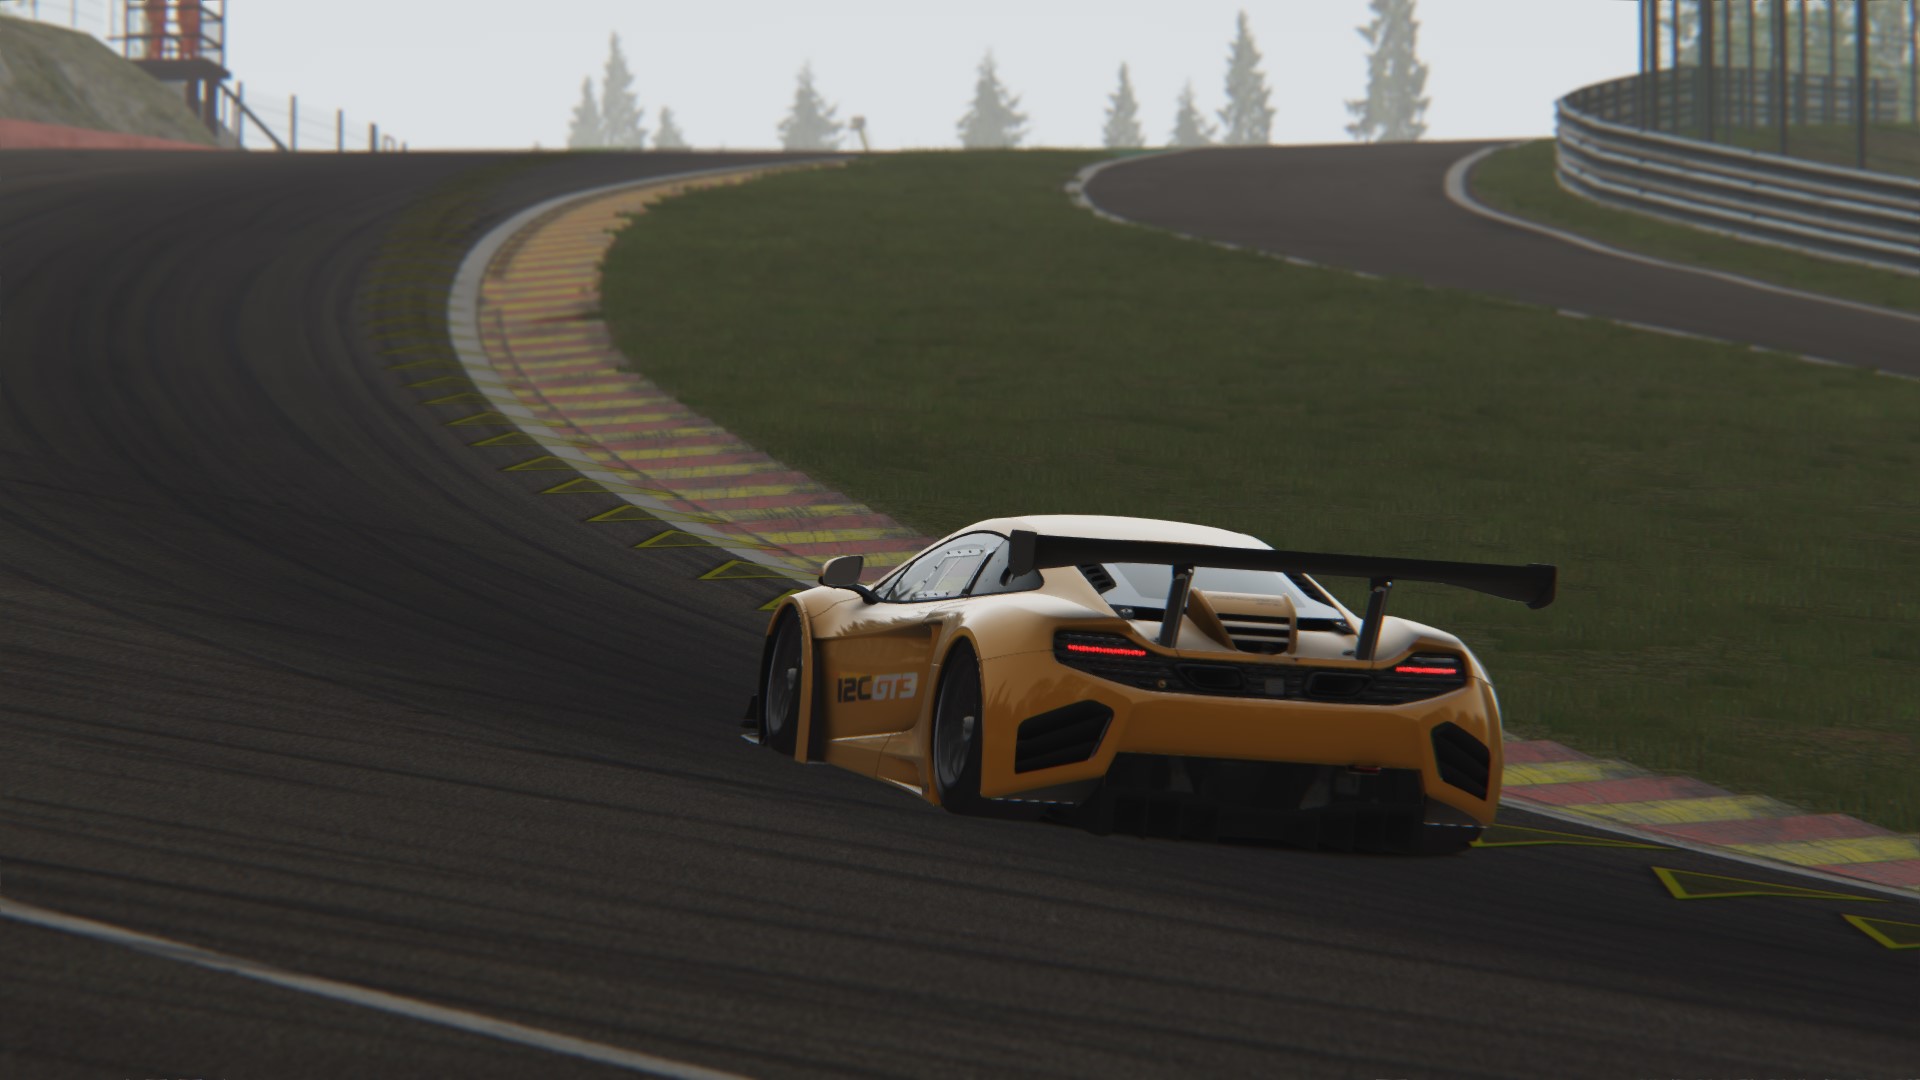 GT3 at Spa was a common combination online. 